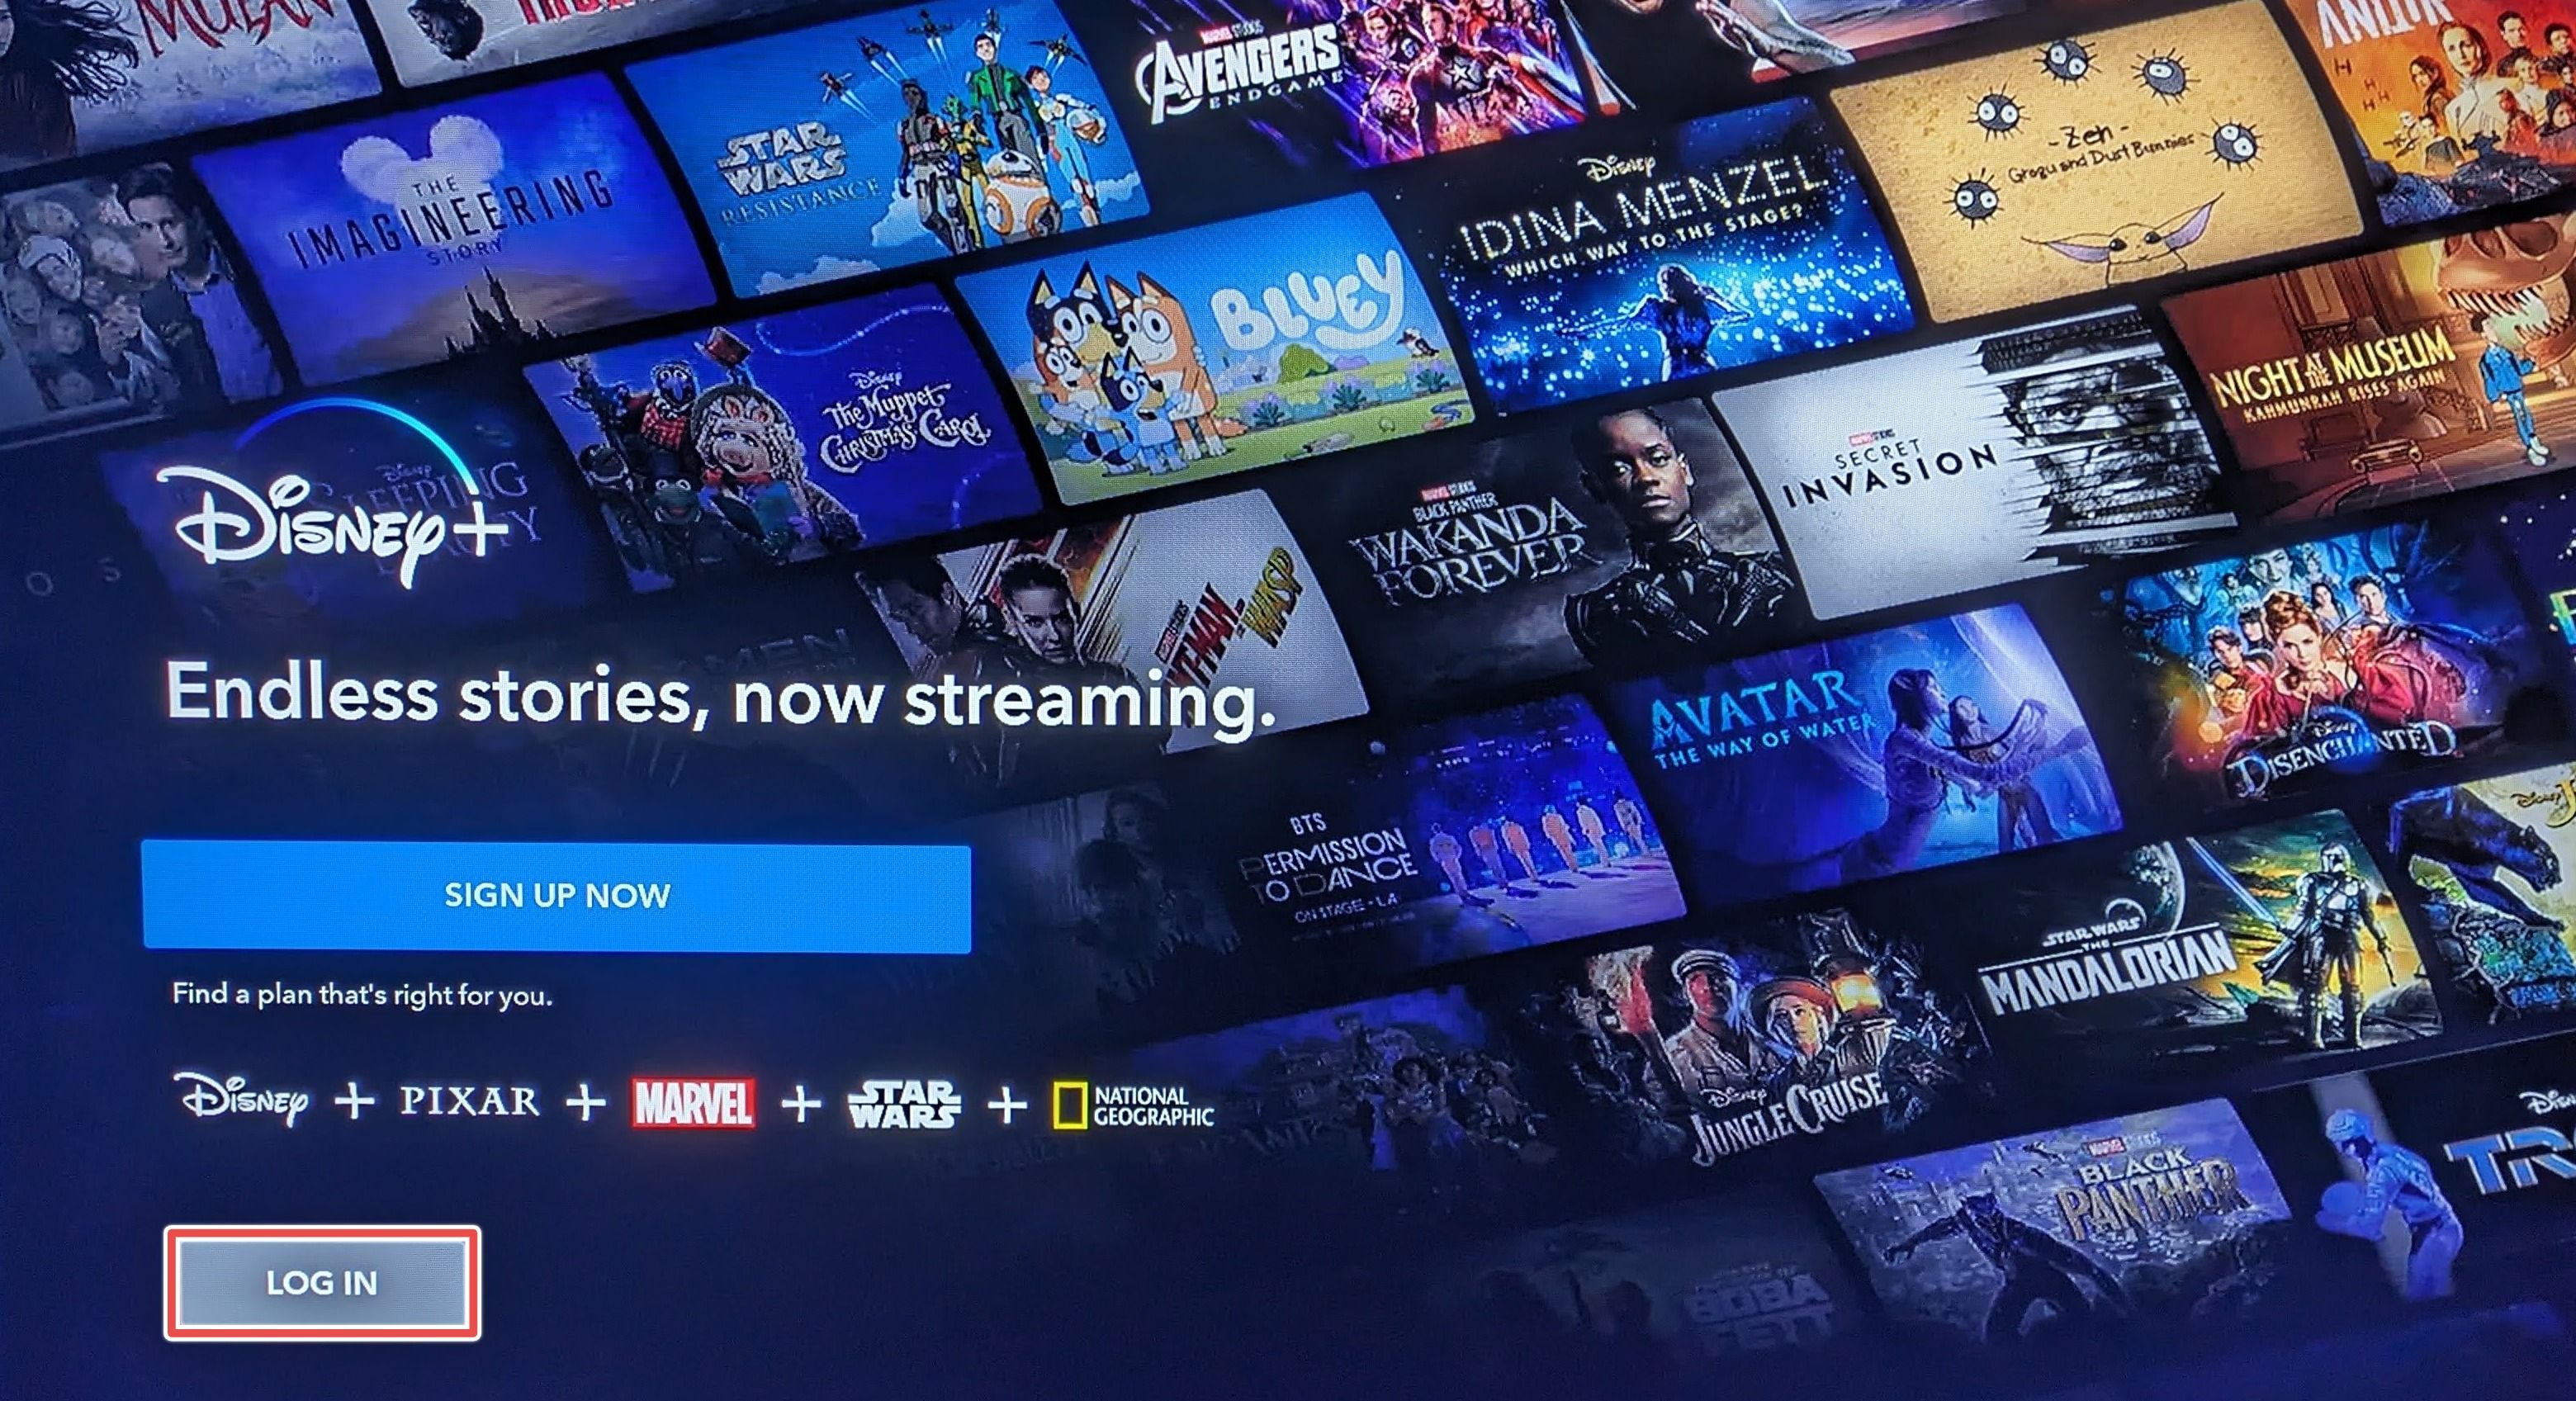 Disney+ is now streaming on the Roku platform in Canada